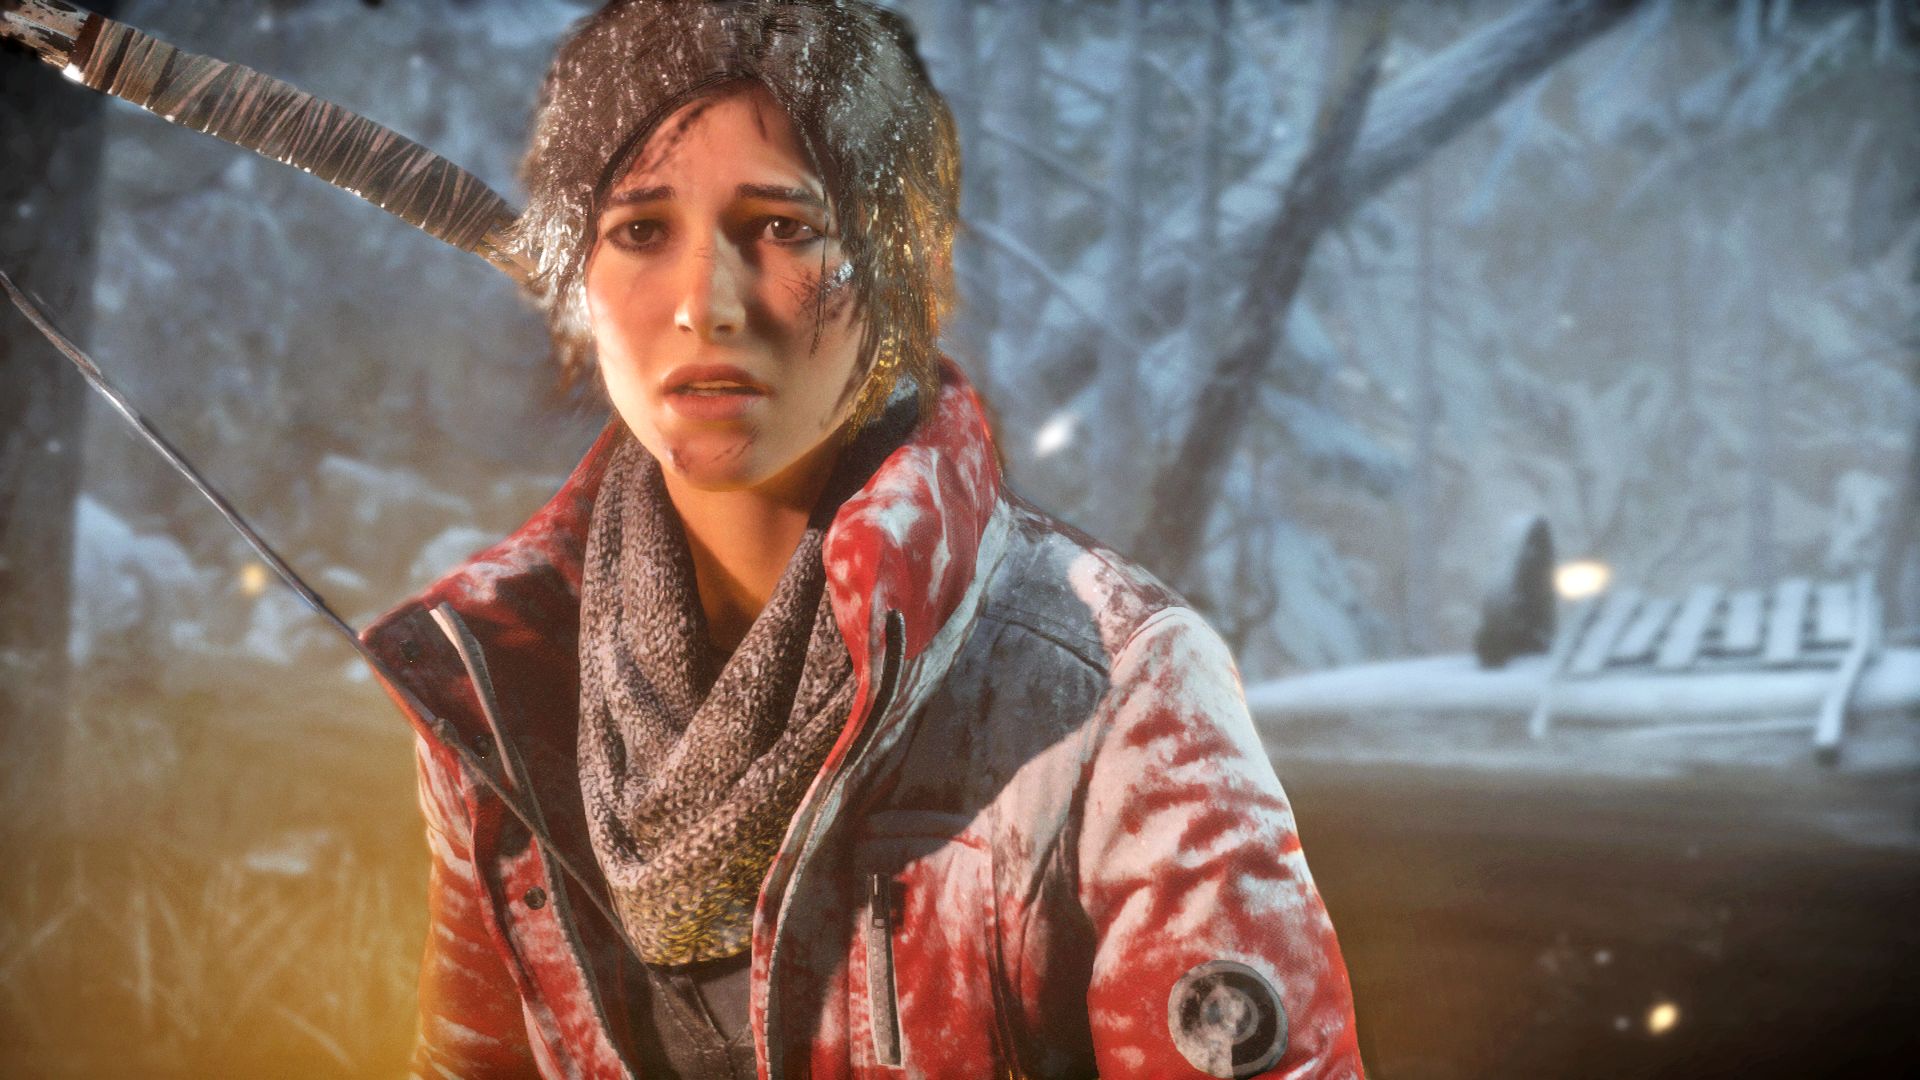 Further Evidence for “Tomb Raider” PC Version Coming Jan. 2016 - Hard to Deny Steam's Word